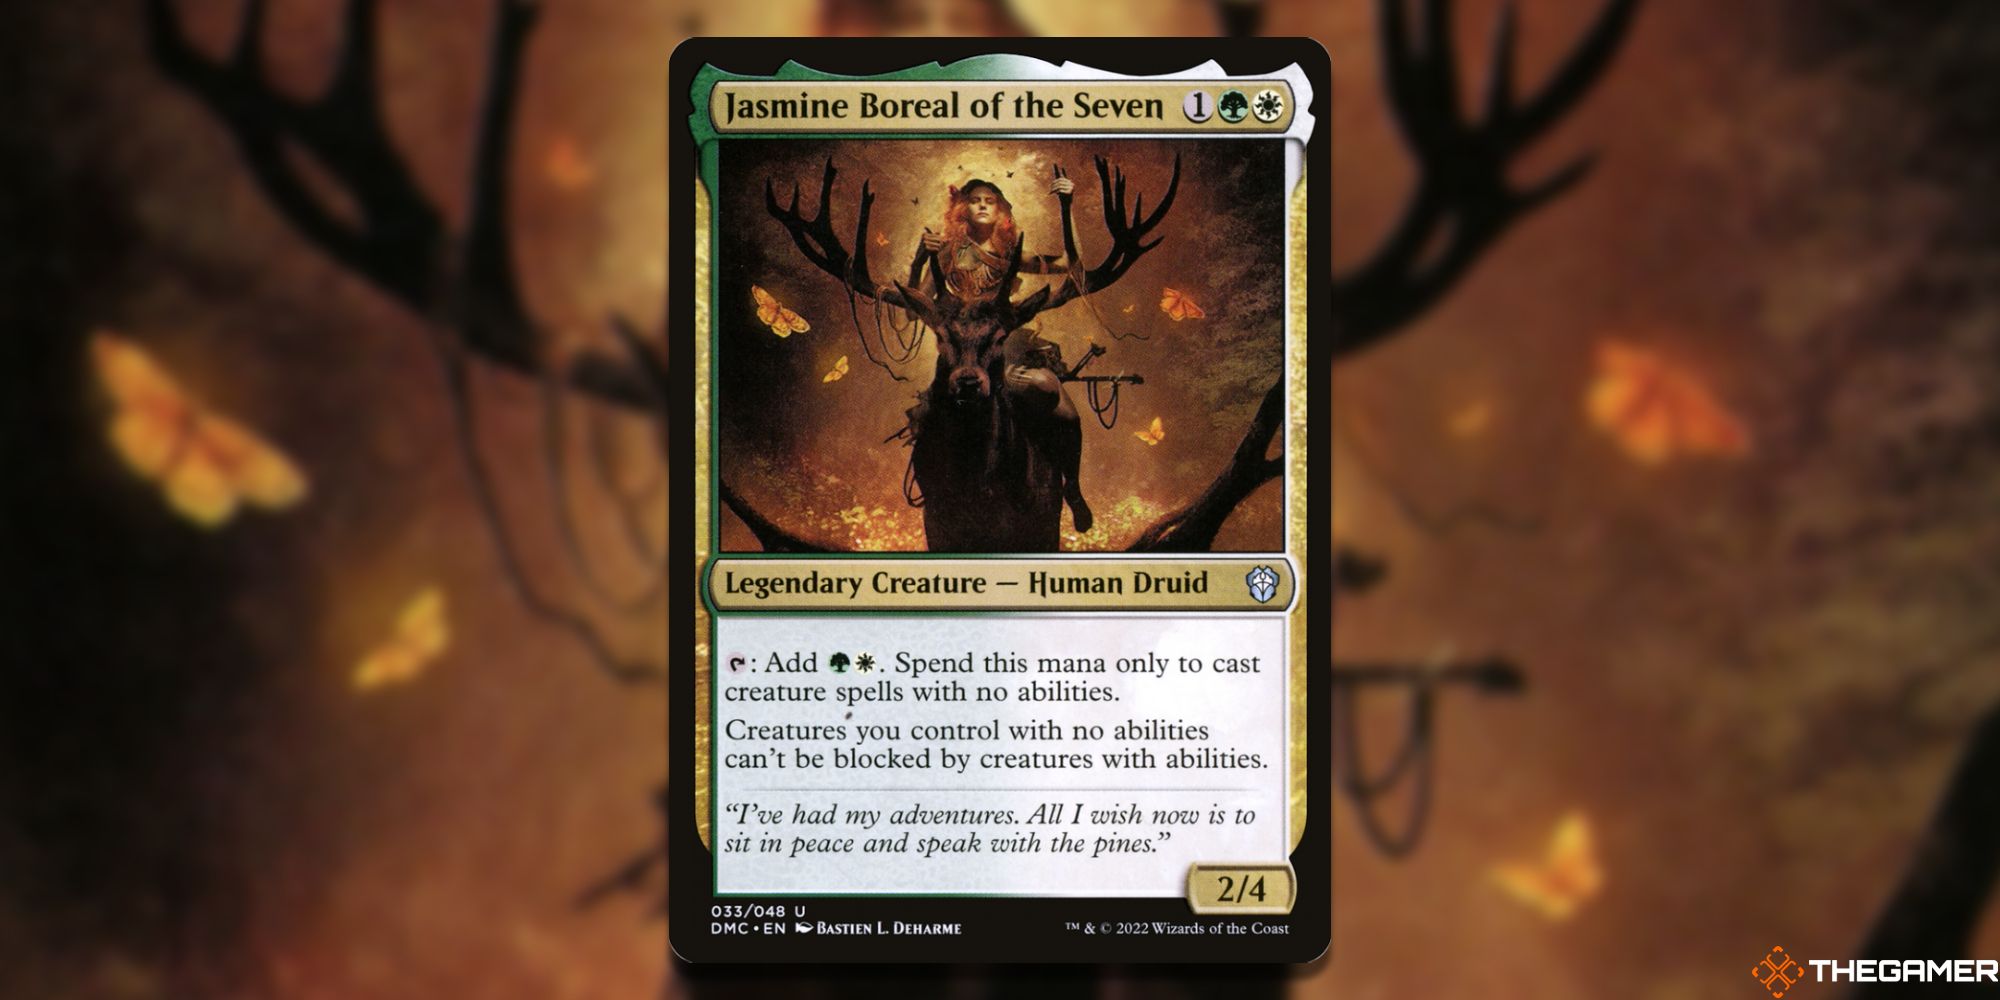 Image of the Jasmine Boreal of the Seven card in Magic: The Gathering, with art by Bastien L Deharme